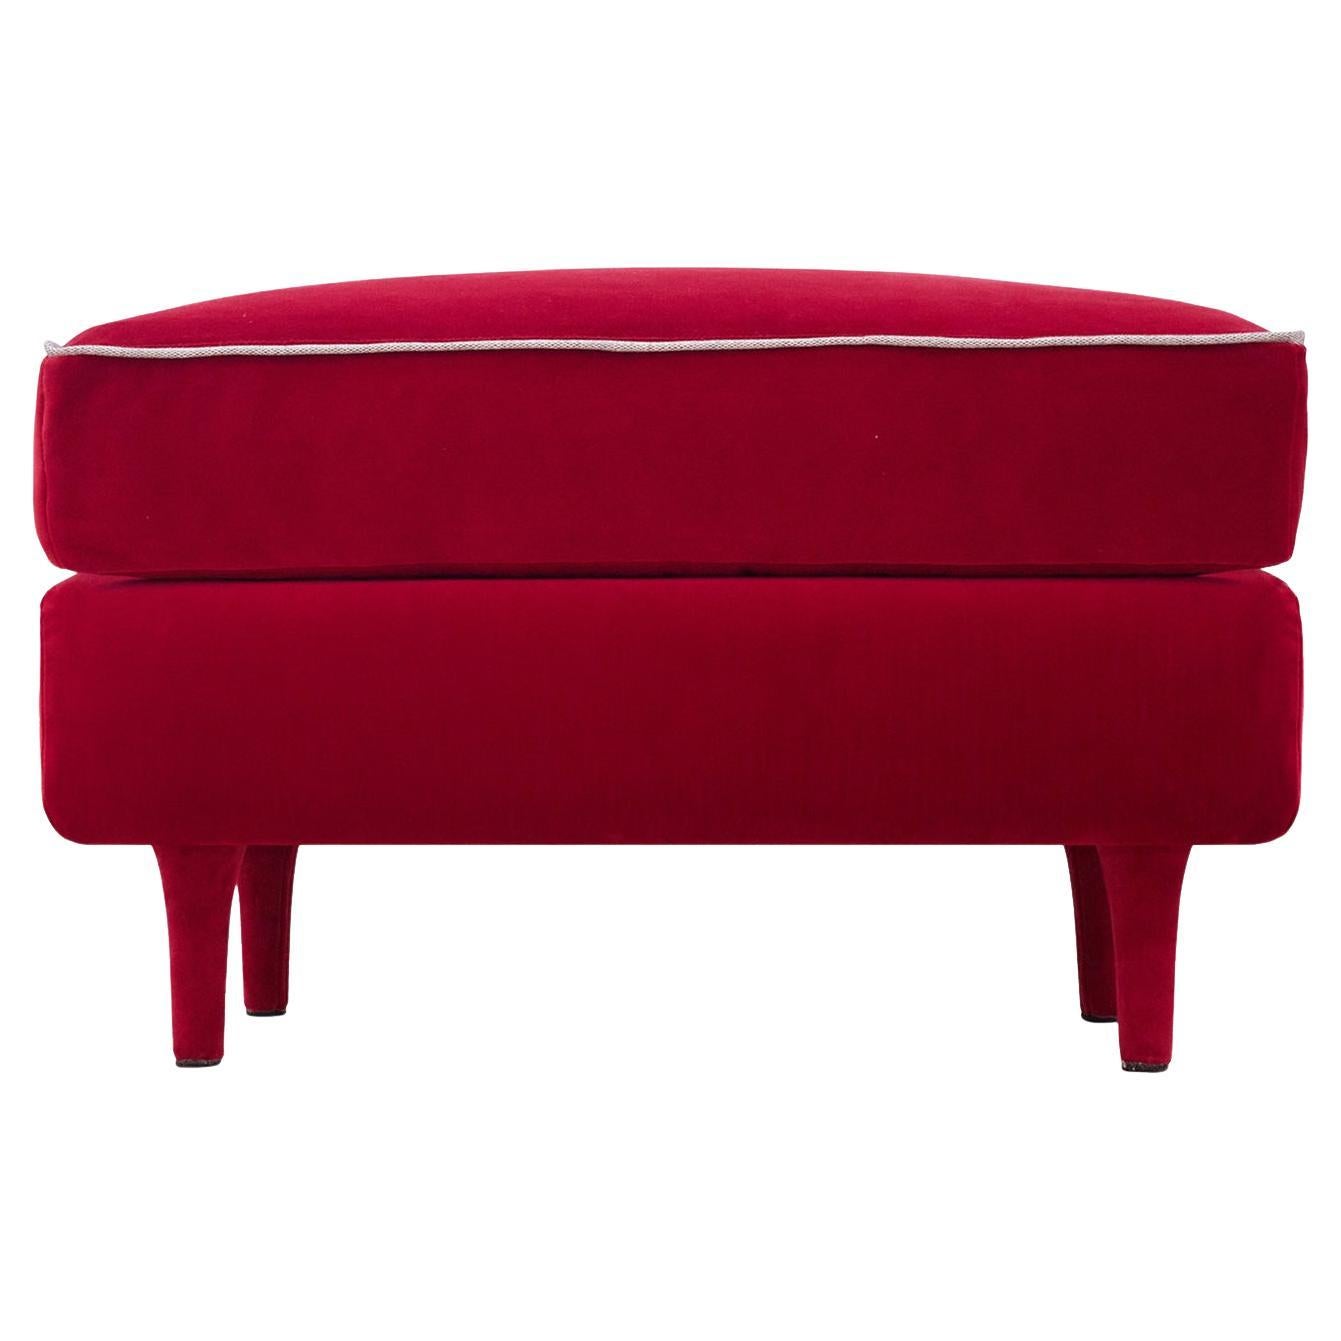 Casquet Ecological Red Passion Velvet Ottoman For Sale